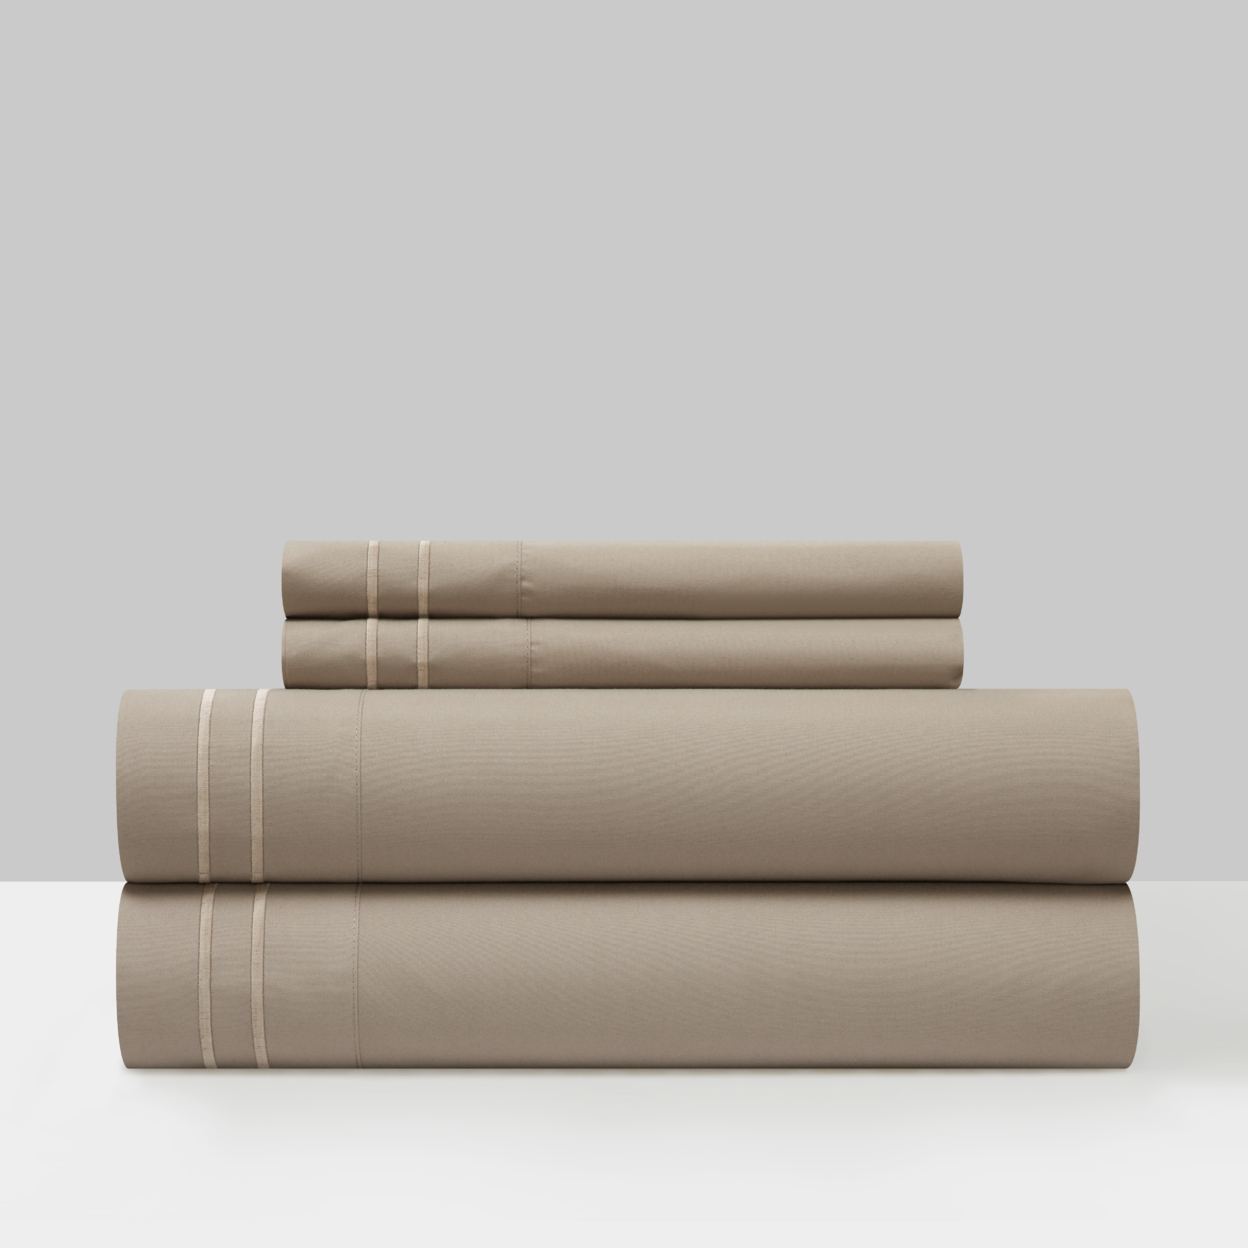 Vina 3 Or 4 Piece Sheet Set Solid Color With Dual Stripe Embroidery - Taupe, Twin